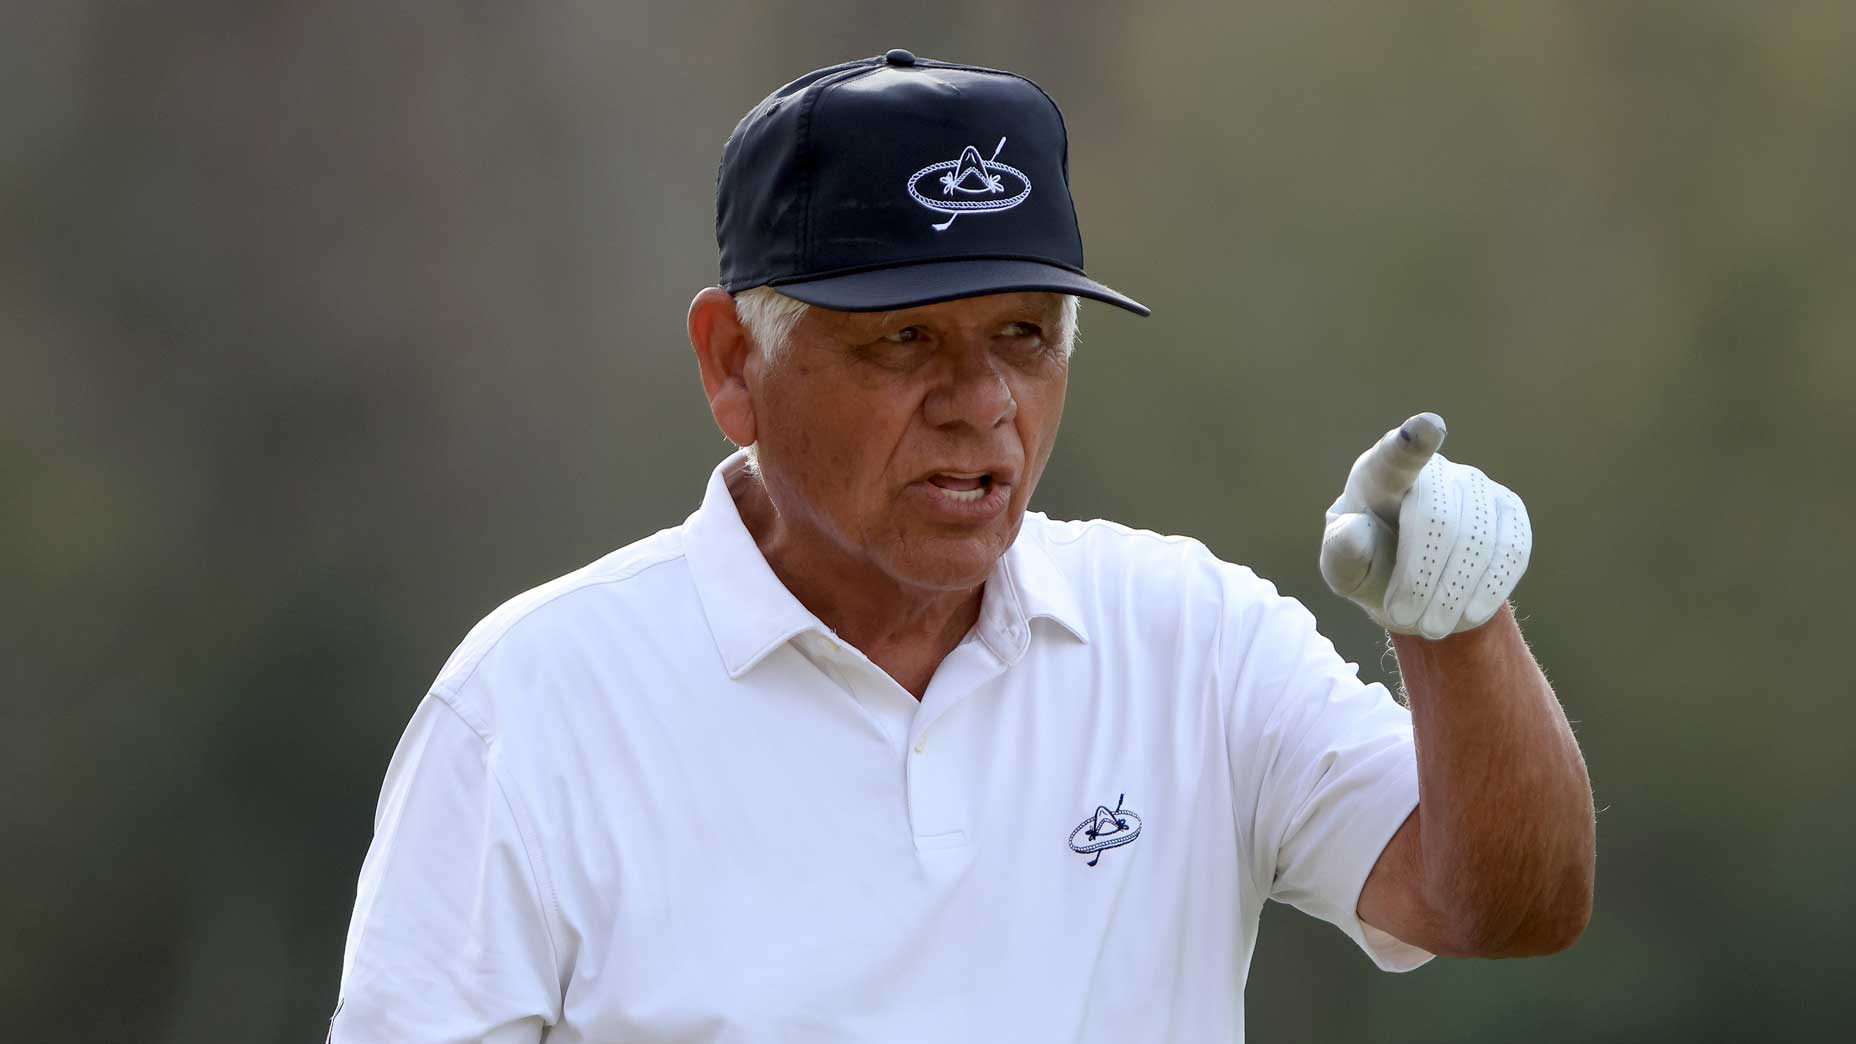 Lee Trevino, as only he can, gave a president an important putting tip